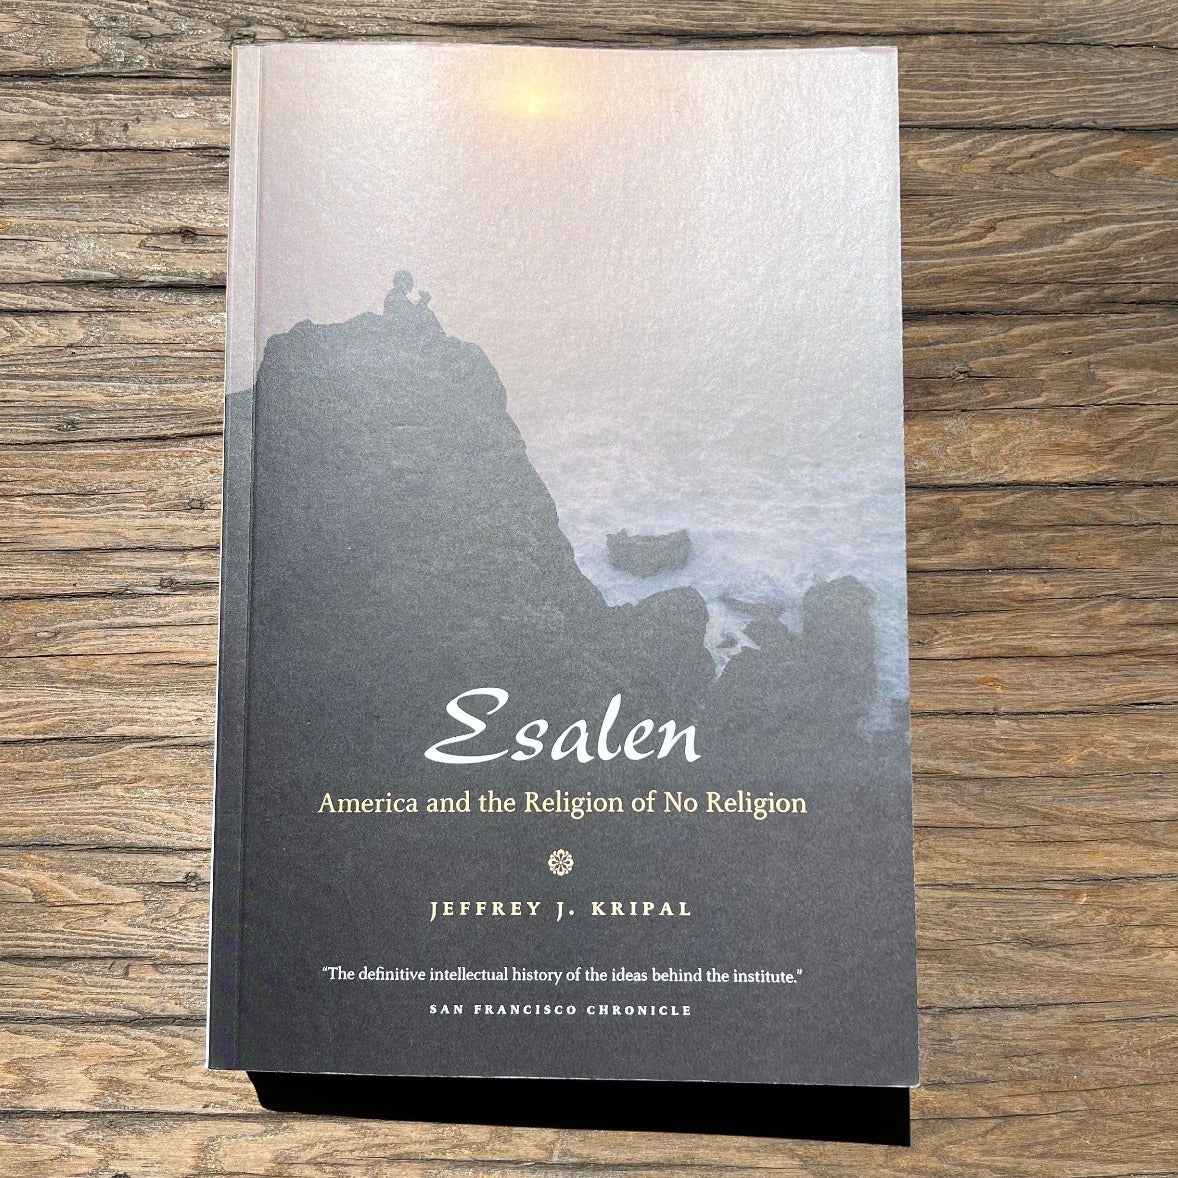 Esalen - America and the Religion of No Religion by Jeffrey Kripal